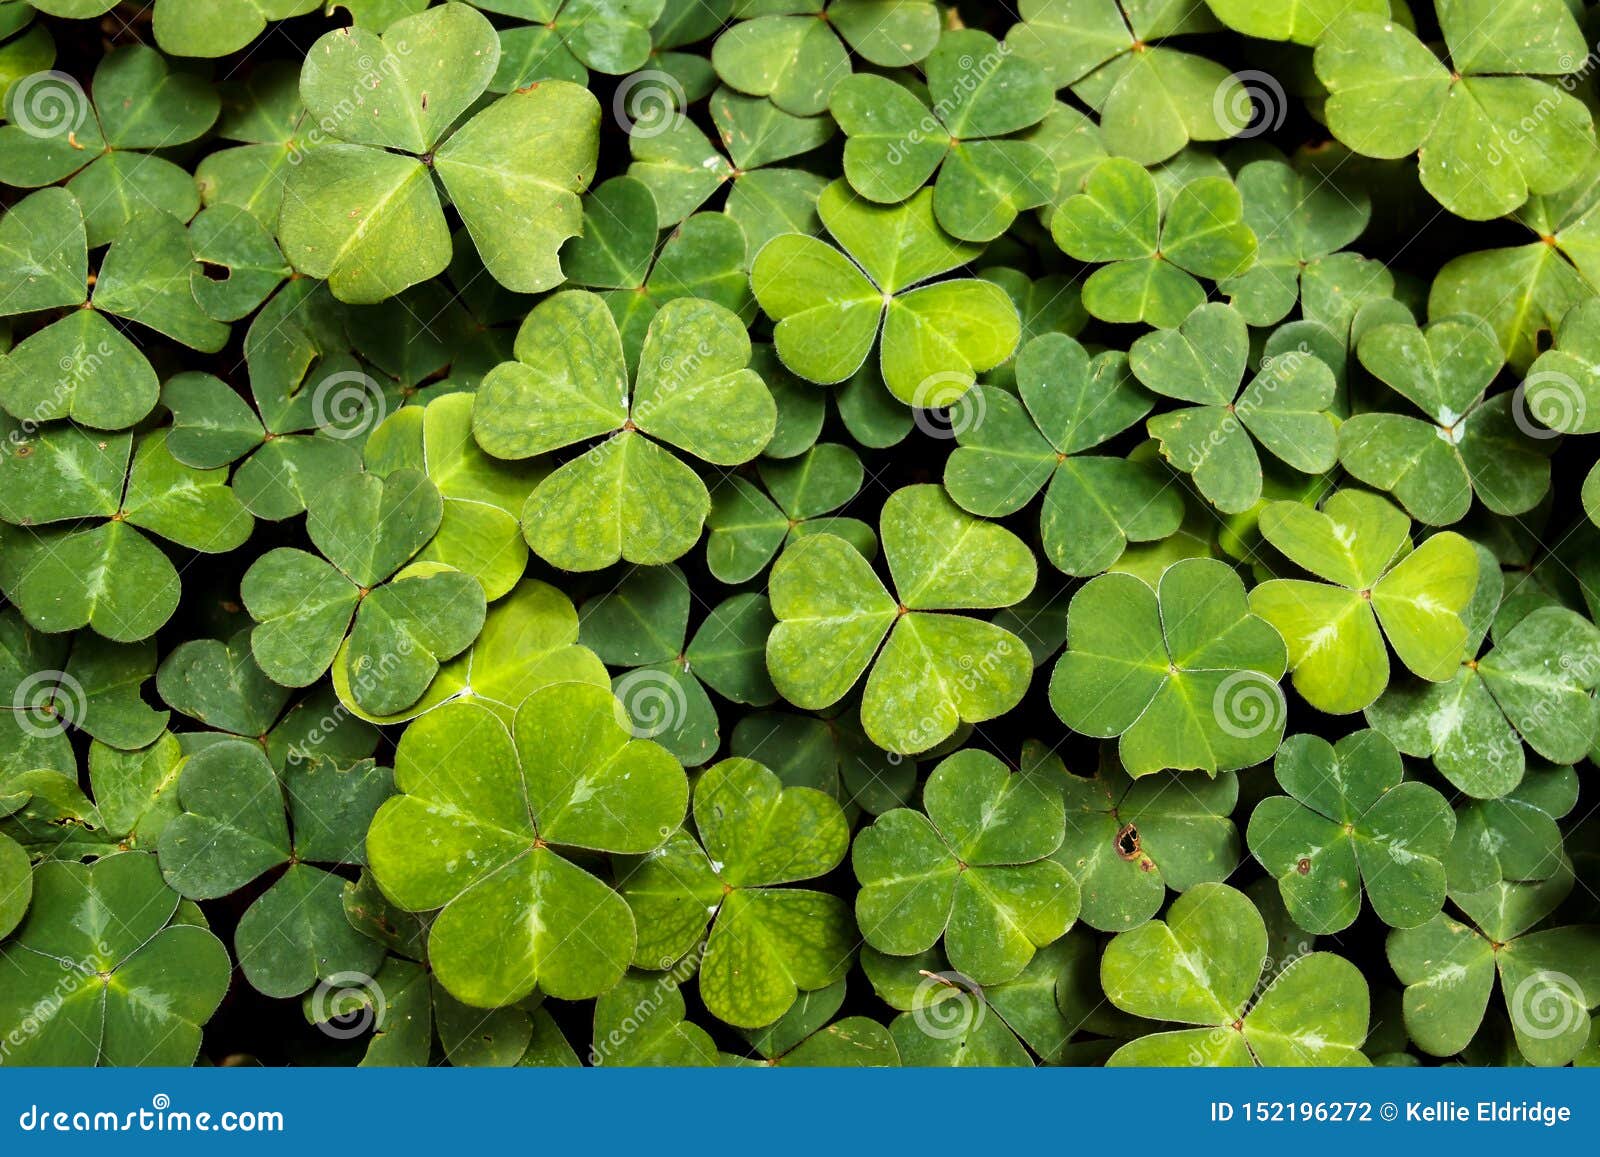 lush green carpet of redwood sorrel oxalis oregona, a groundcover in redwood forests of the north coast